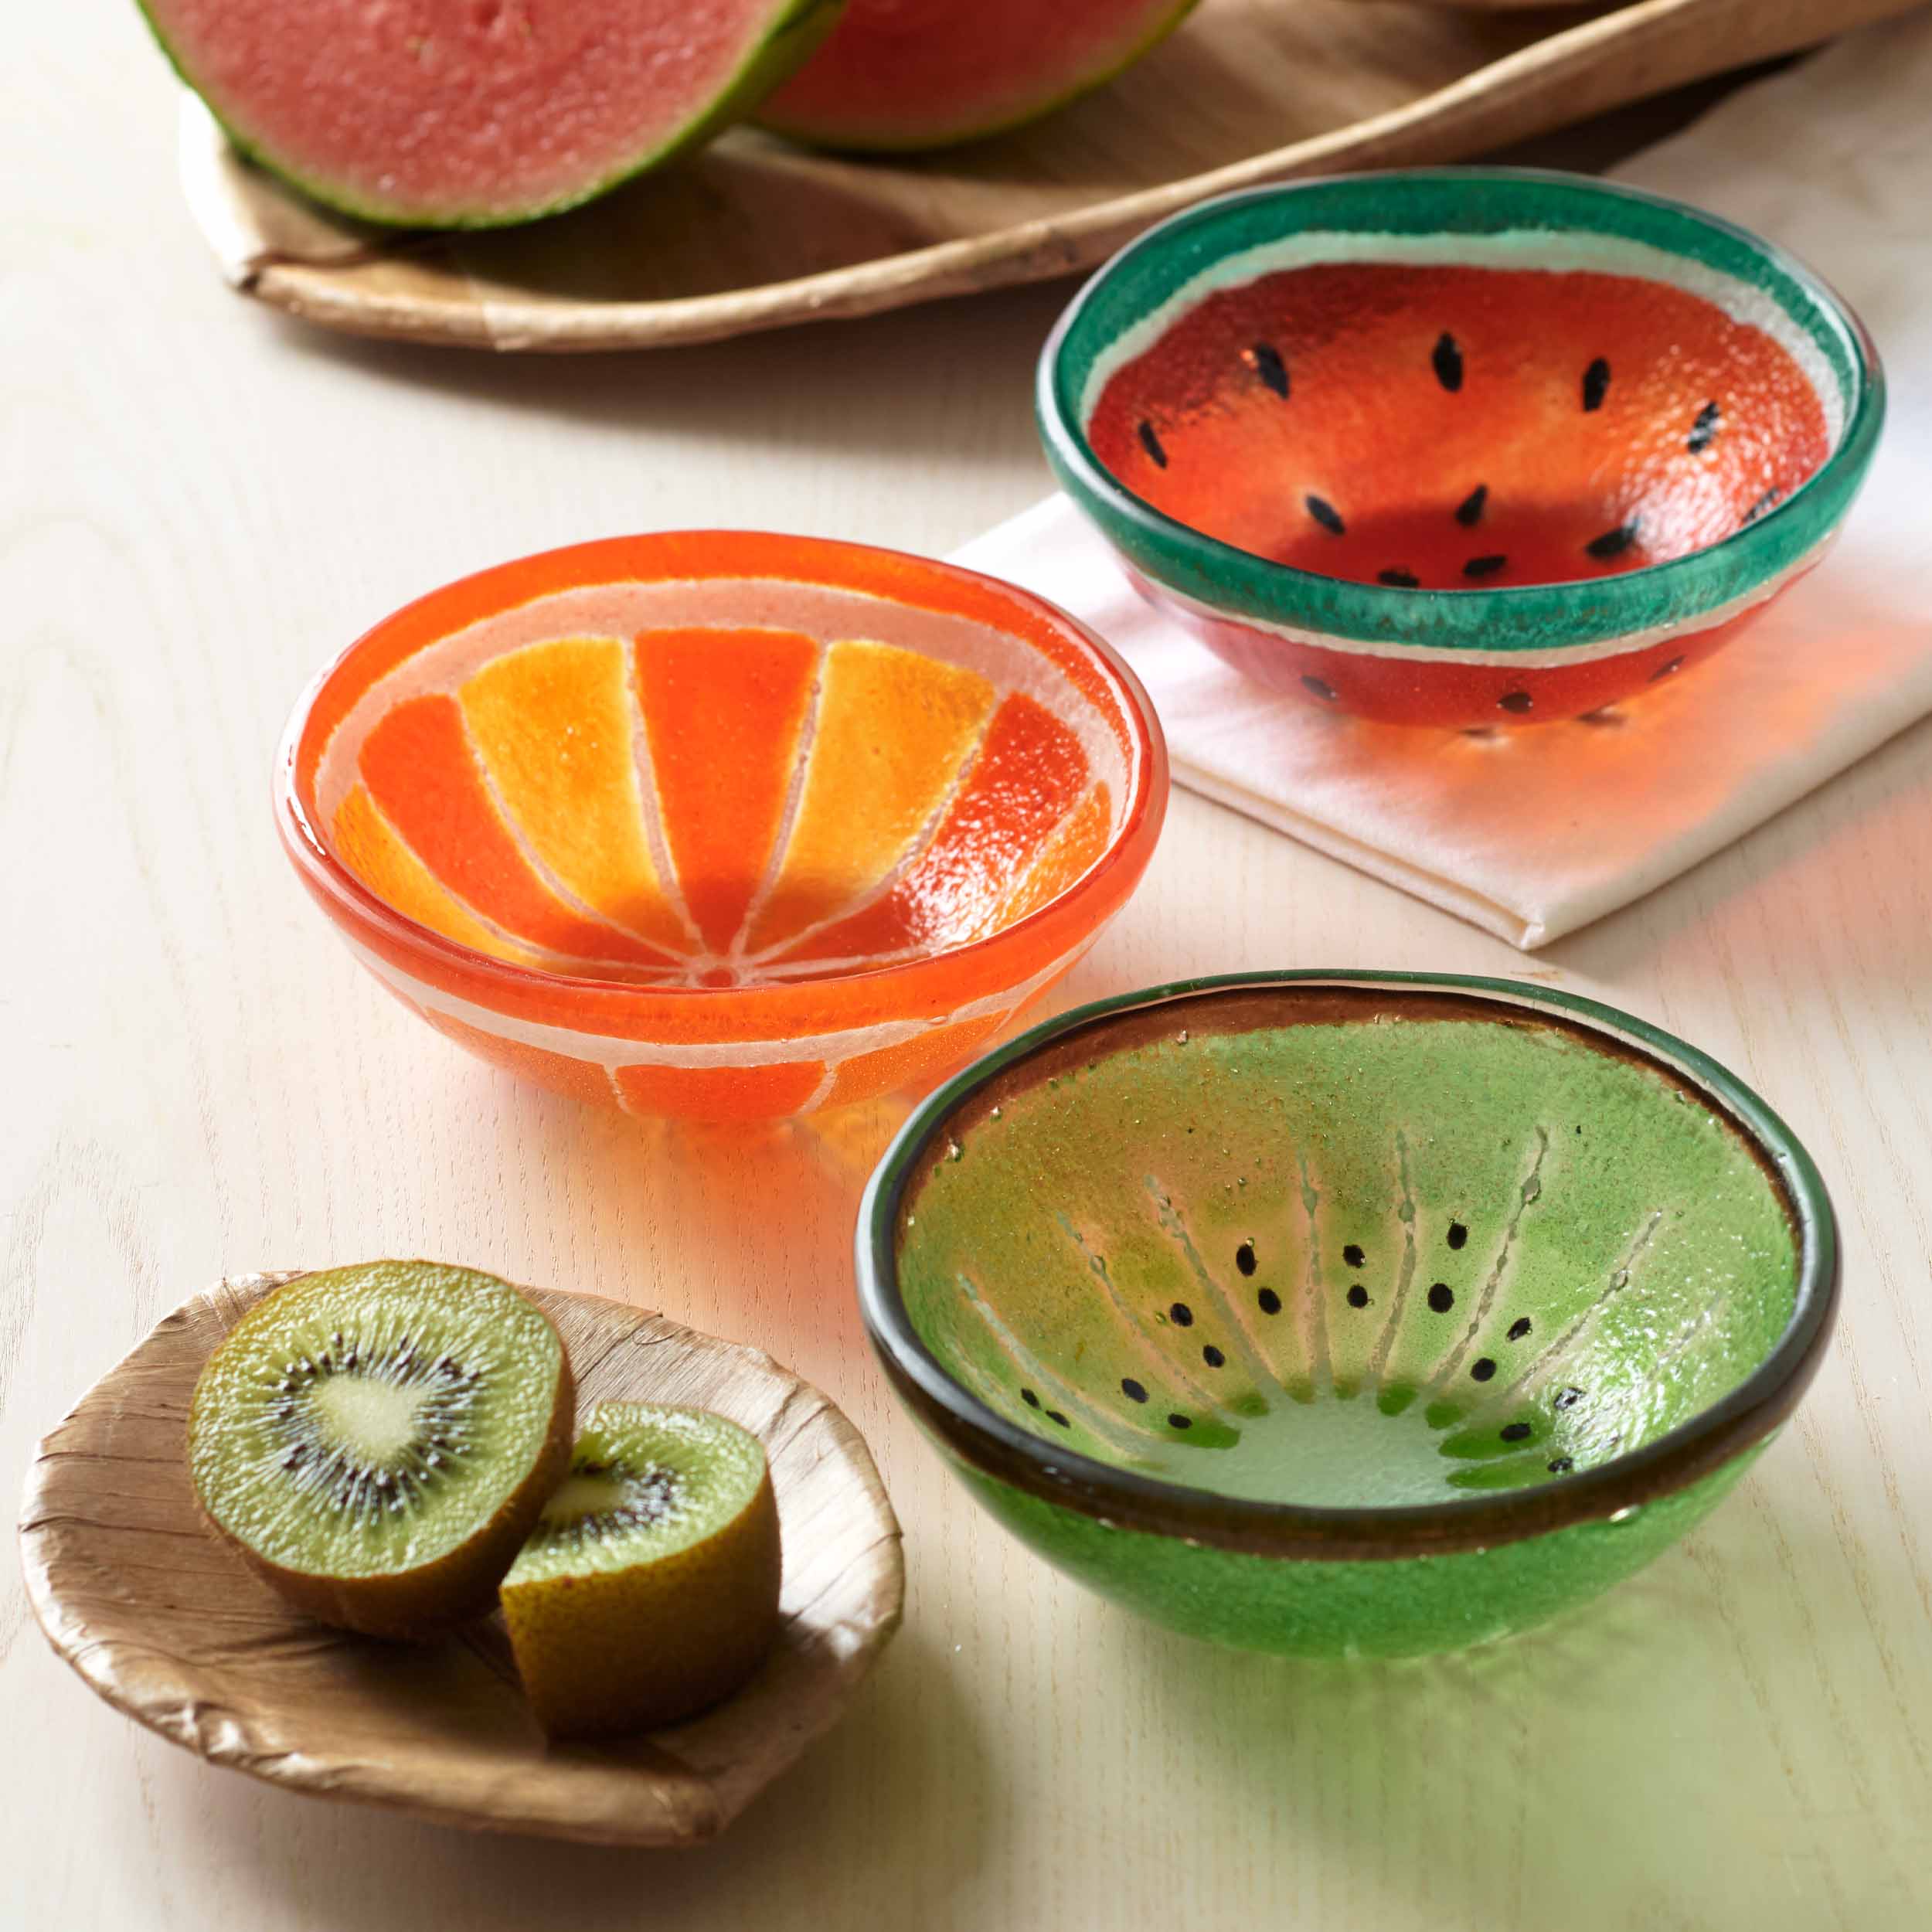 Papeete™ bowl - Red | Image 3 | Premium Bowl from the Papeete collection | made with Glass for long lasting use | texxture